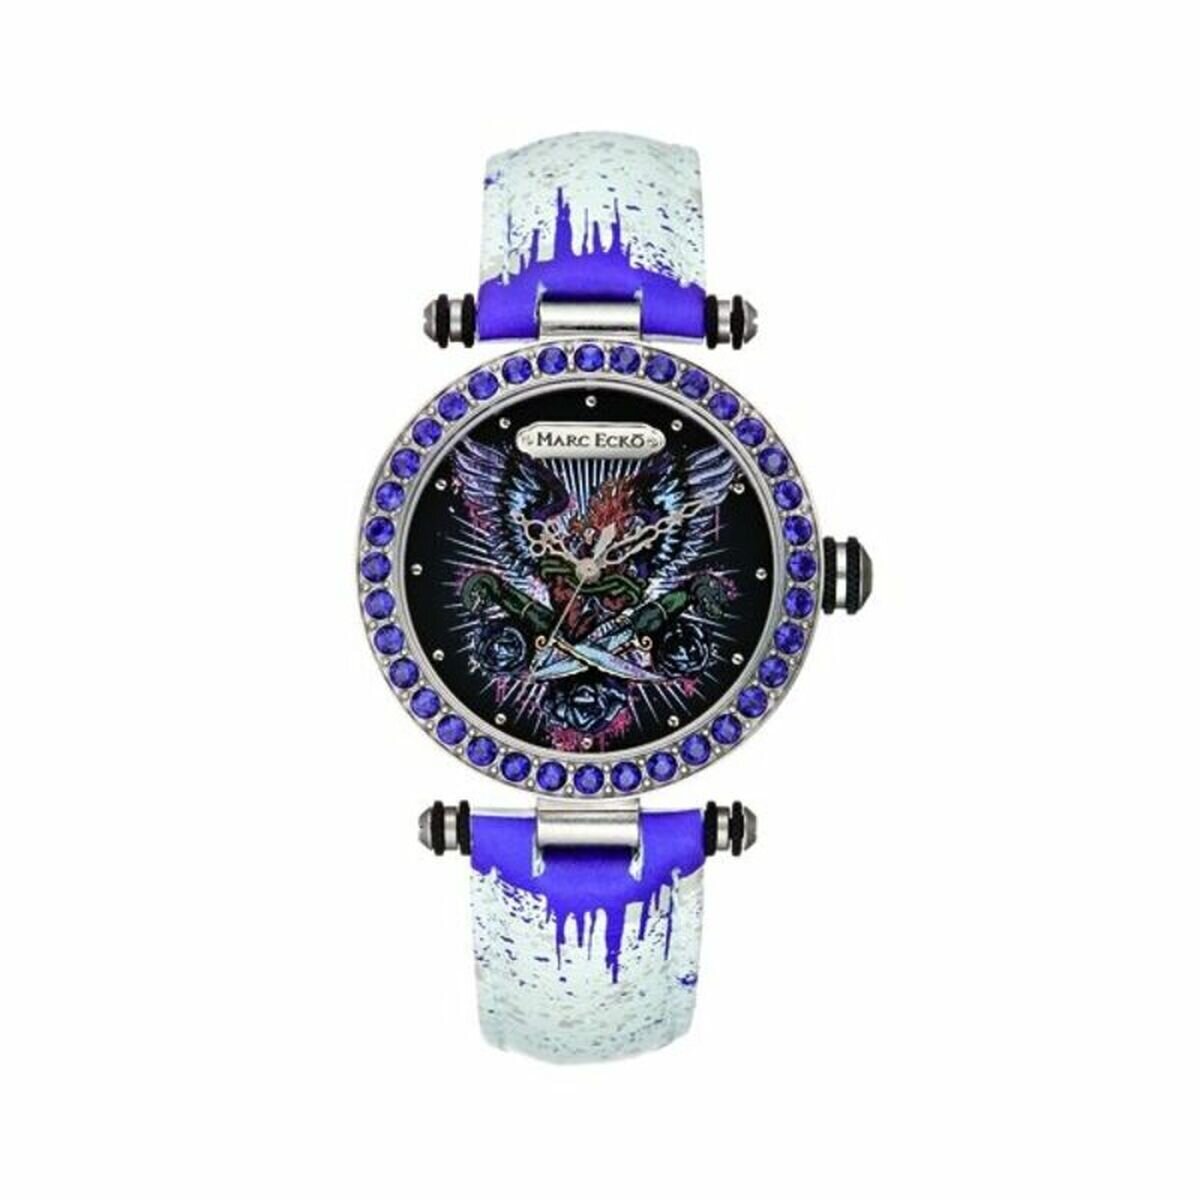 Purple and white Marc Ecko ladies watch